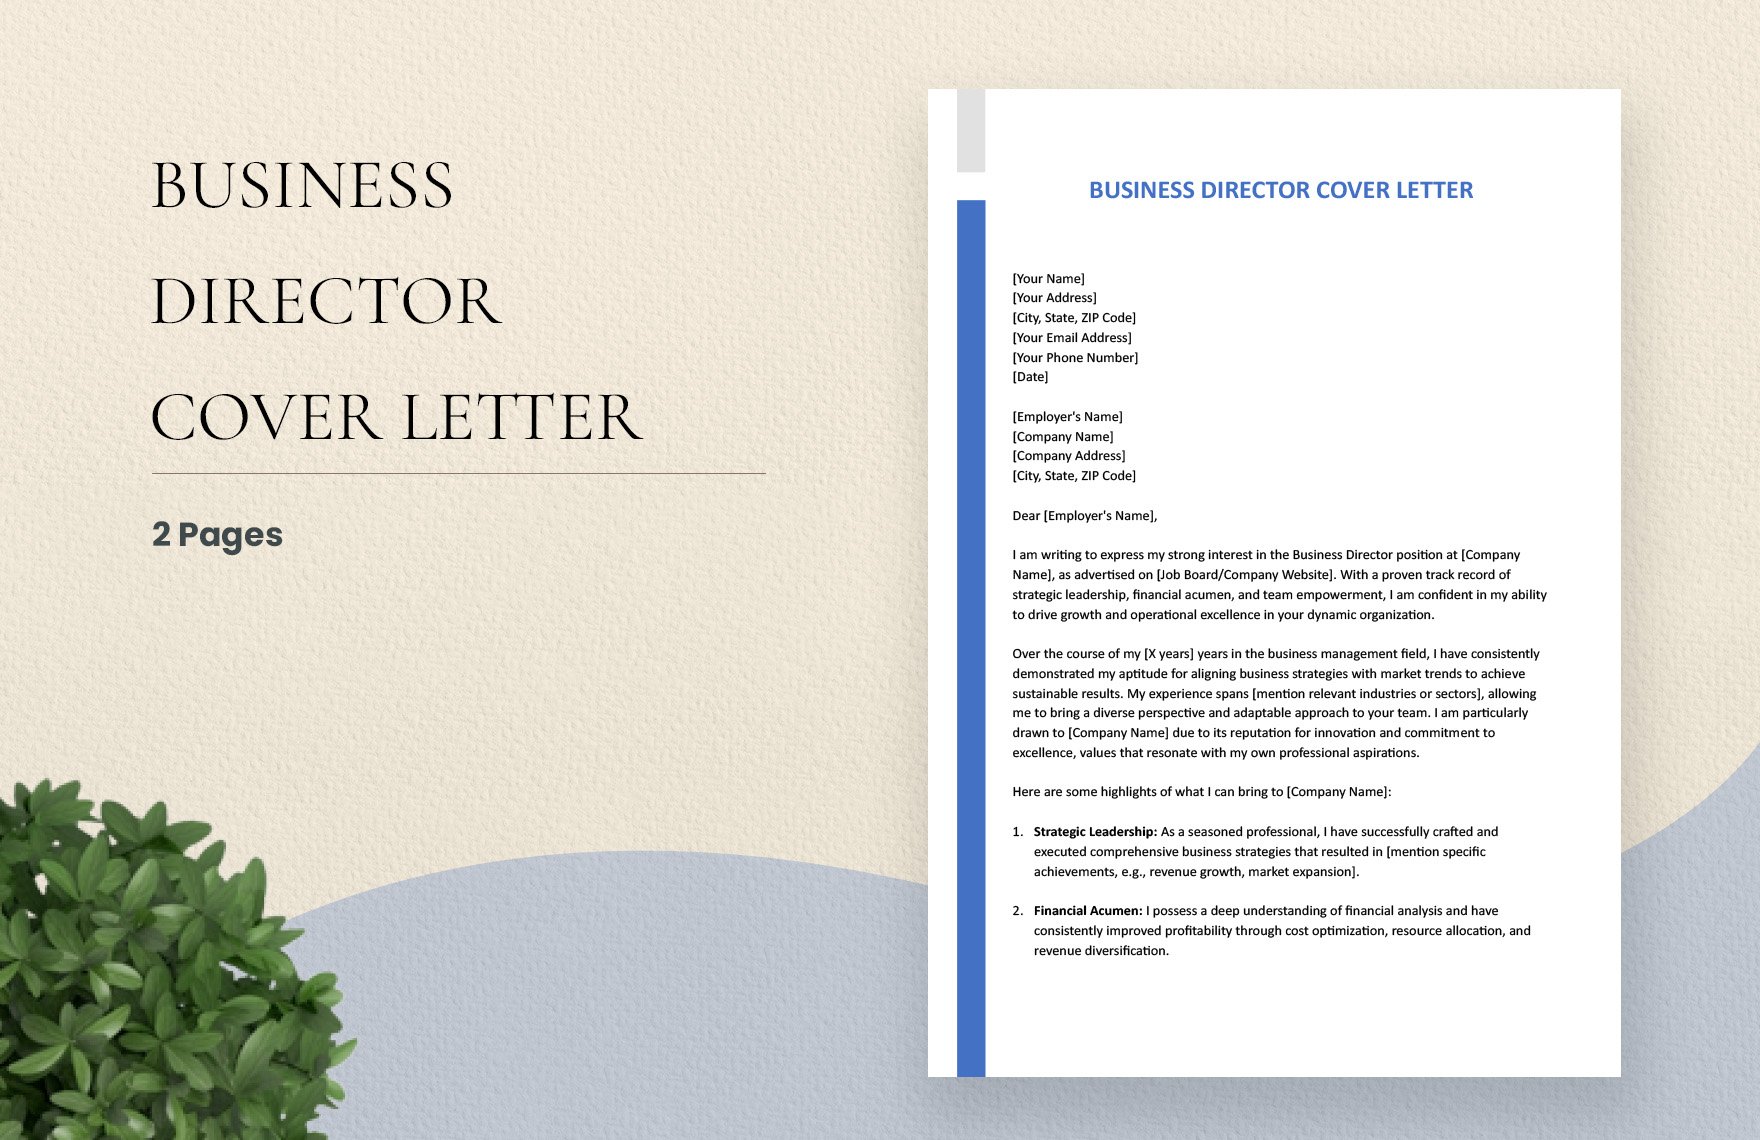 Business Director Cover Letter